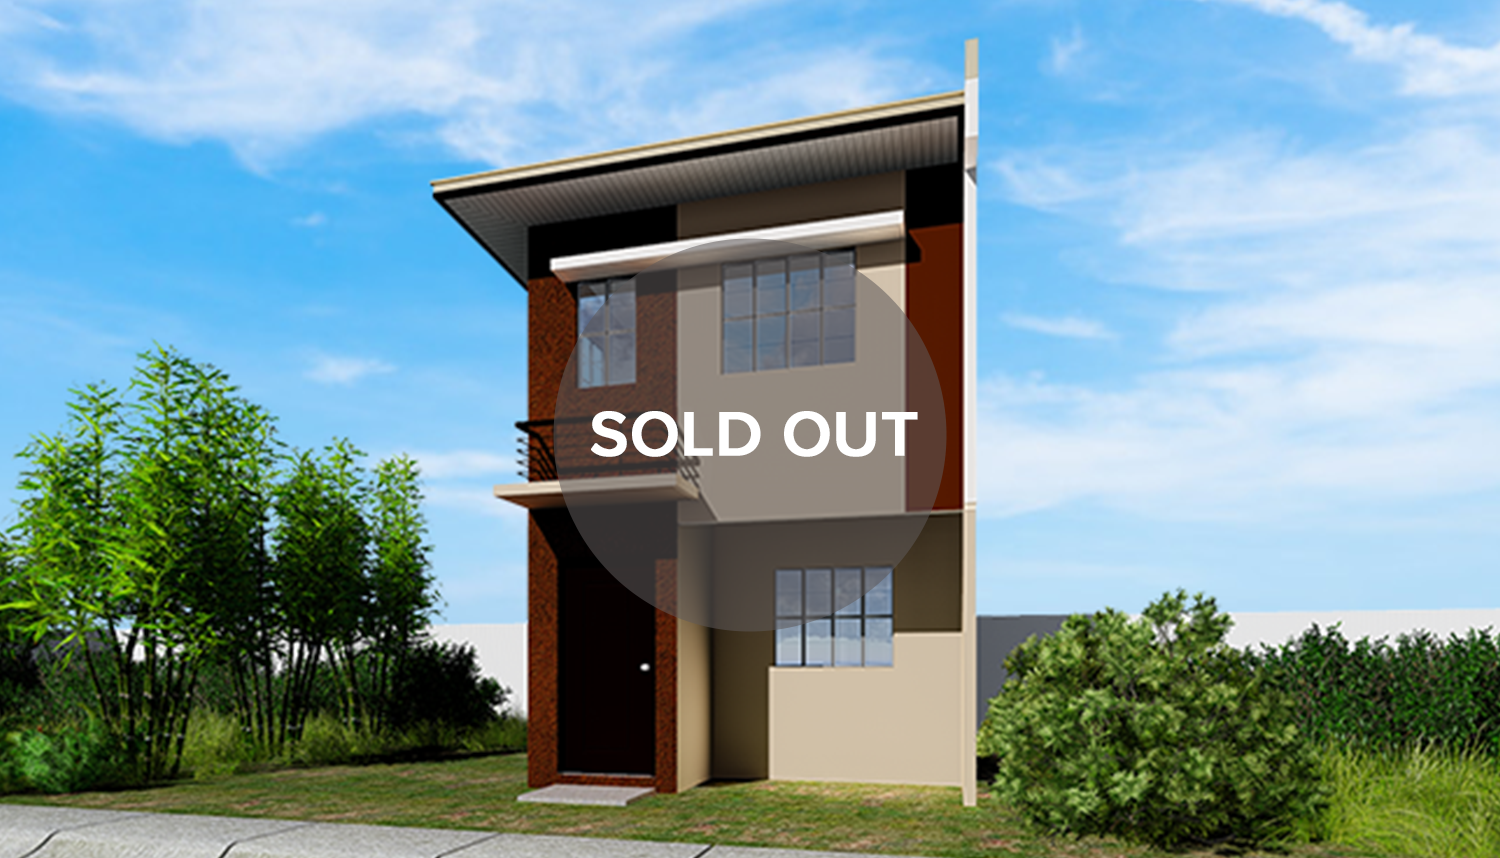 armina single firewall artist perspective 1 sold out | Affordable House and Lot For Sale In The Philippines